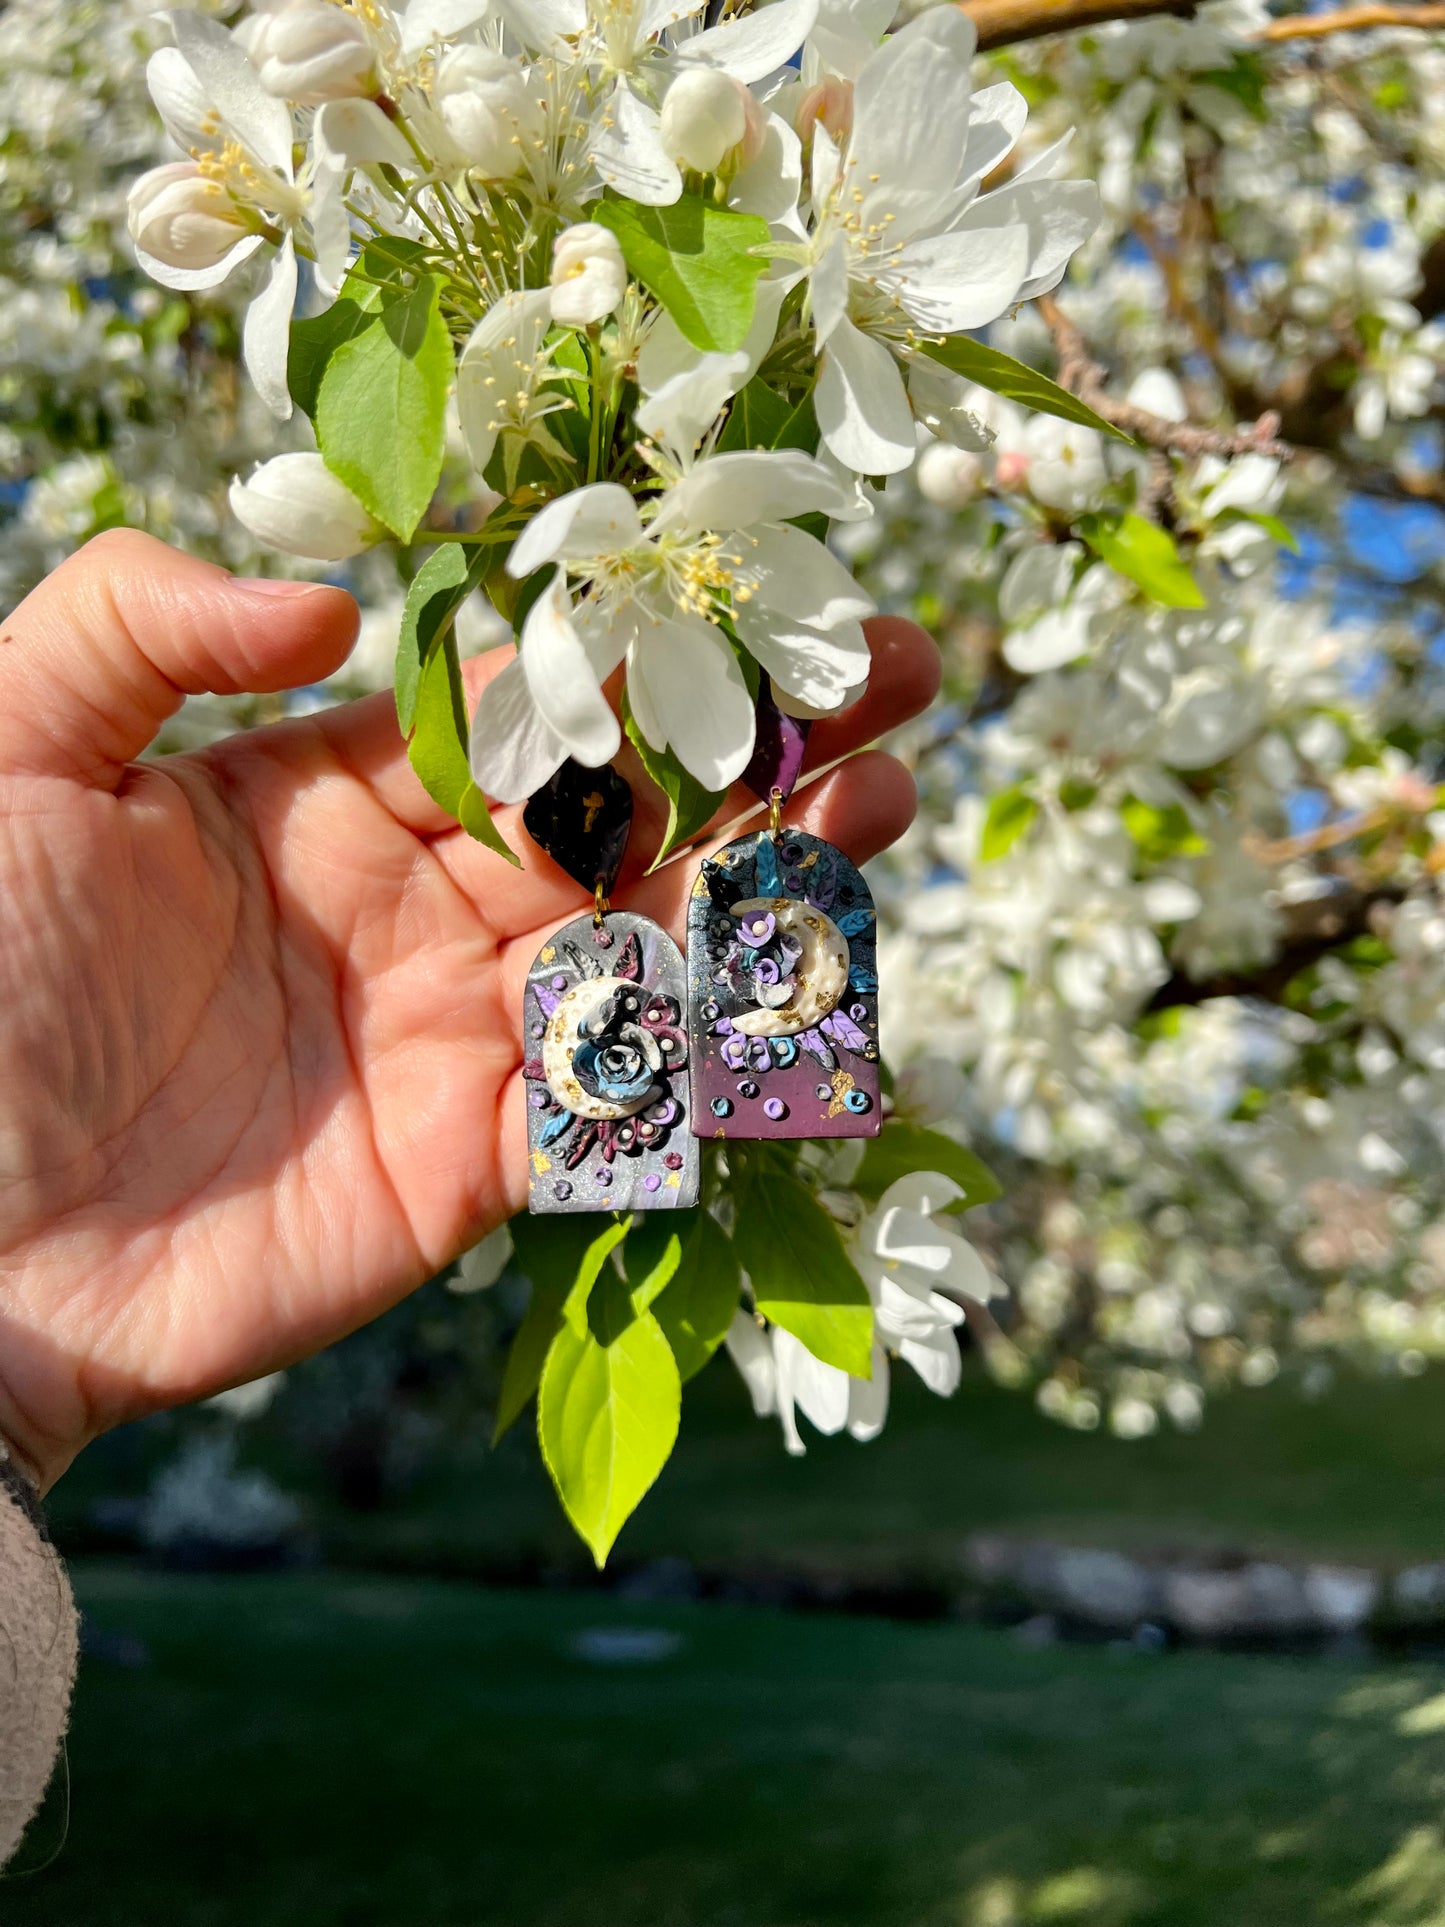 Adorn yourself with the essence of spring with these floral earrings. Crafted with care from kato polymer clay, they symbolize the blooming of flowers during May's Flower Moon. Enjoy both style and comfort with nickel-free, hypoallergenic posts